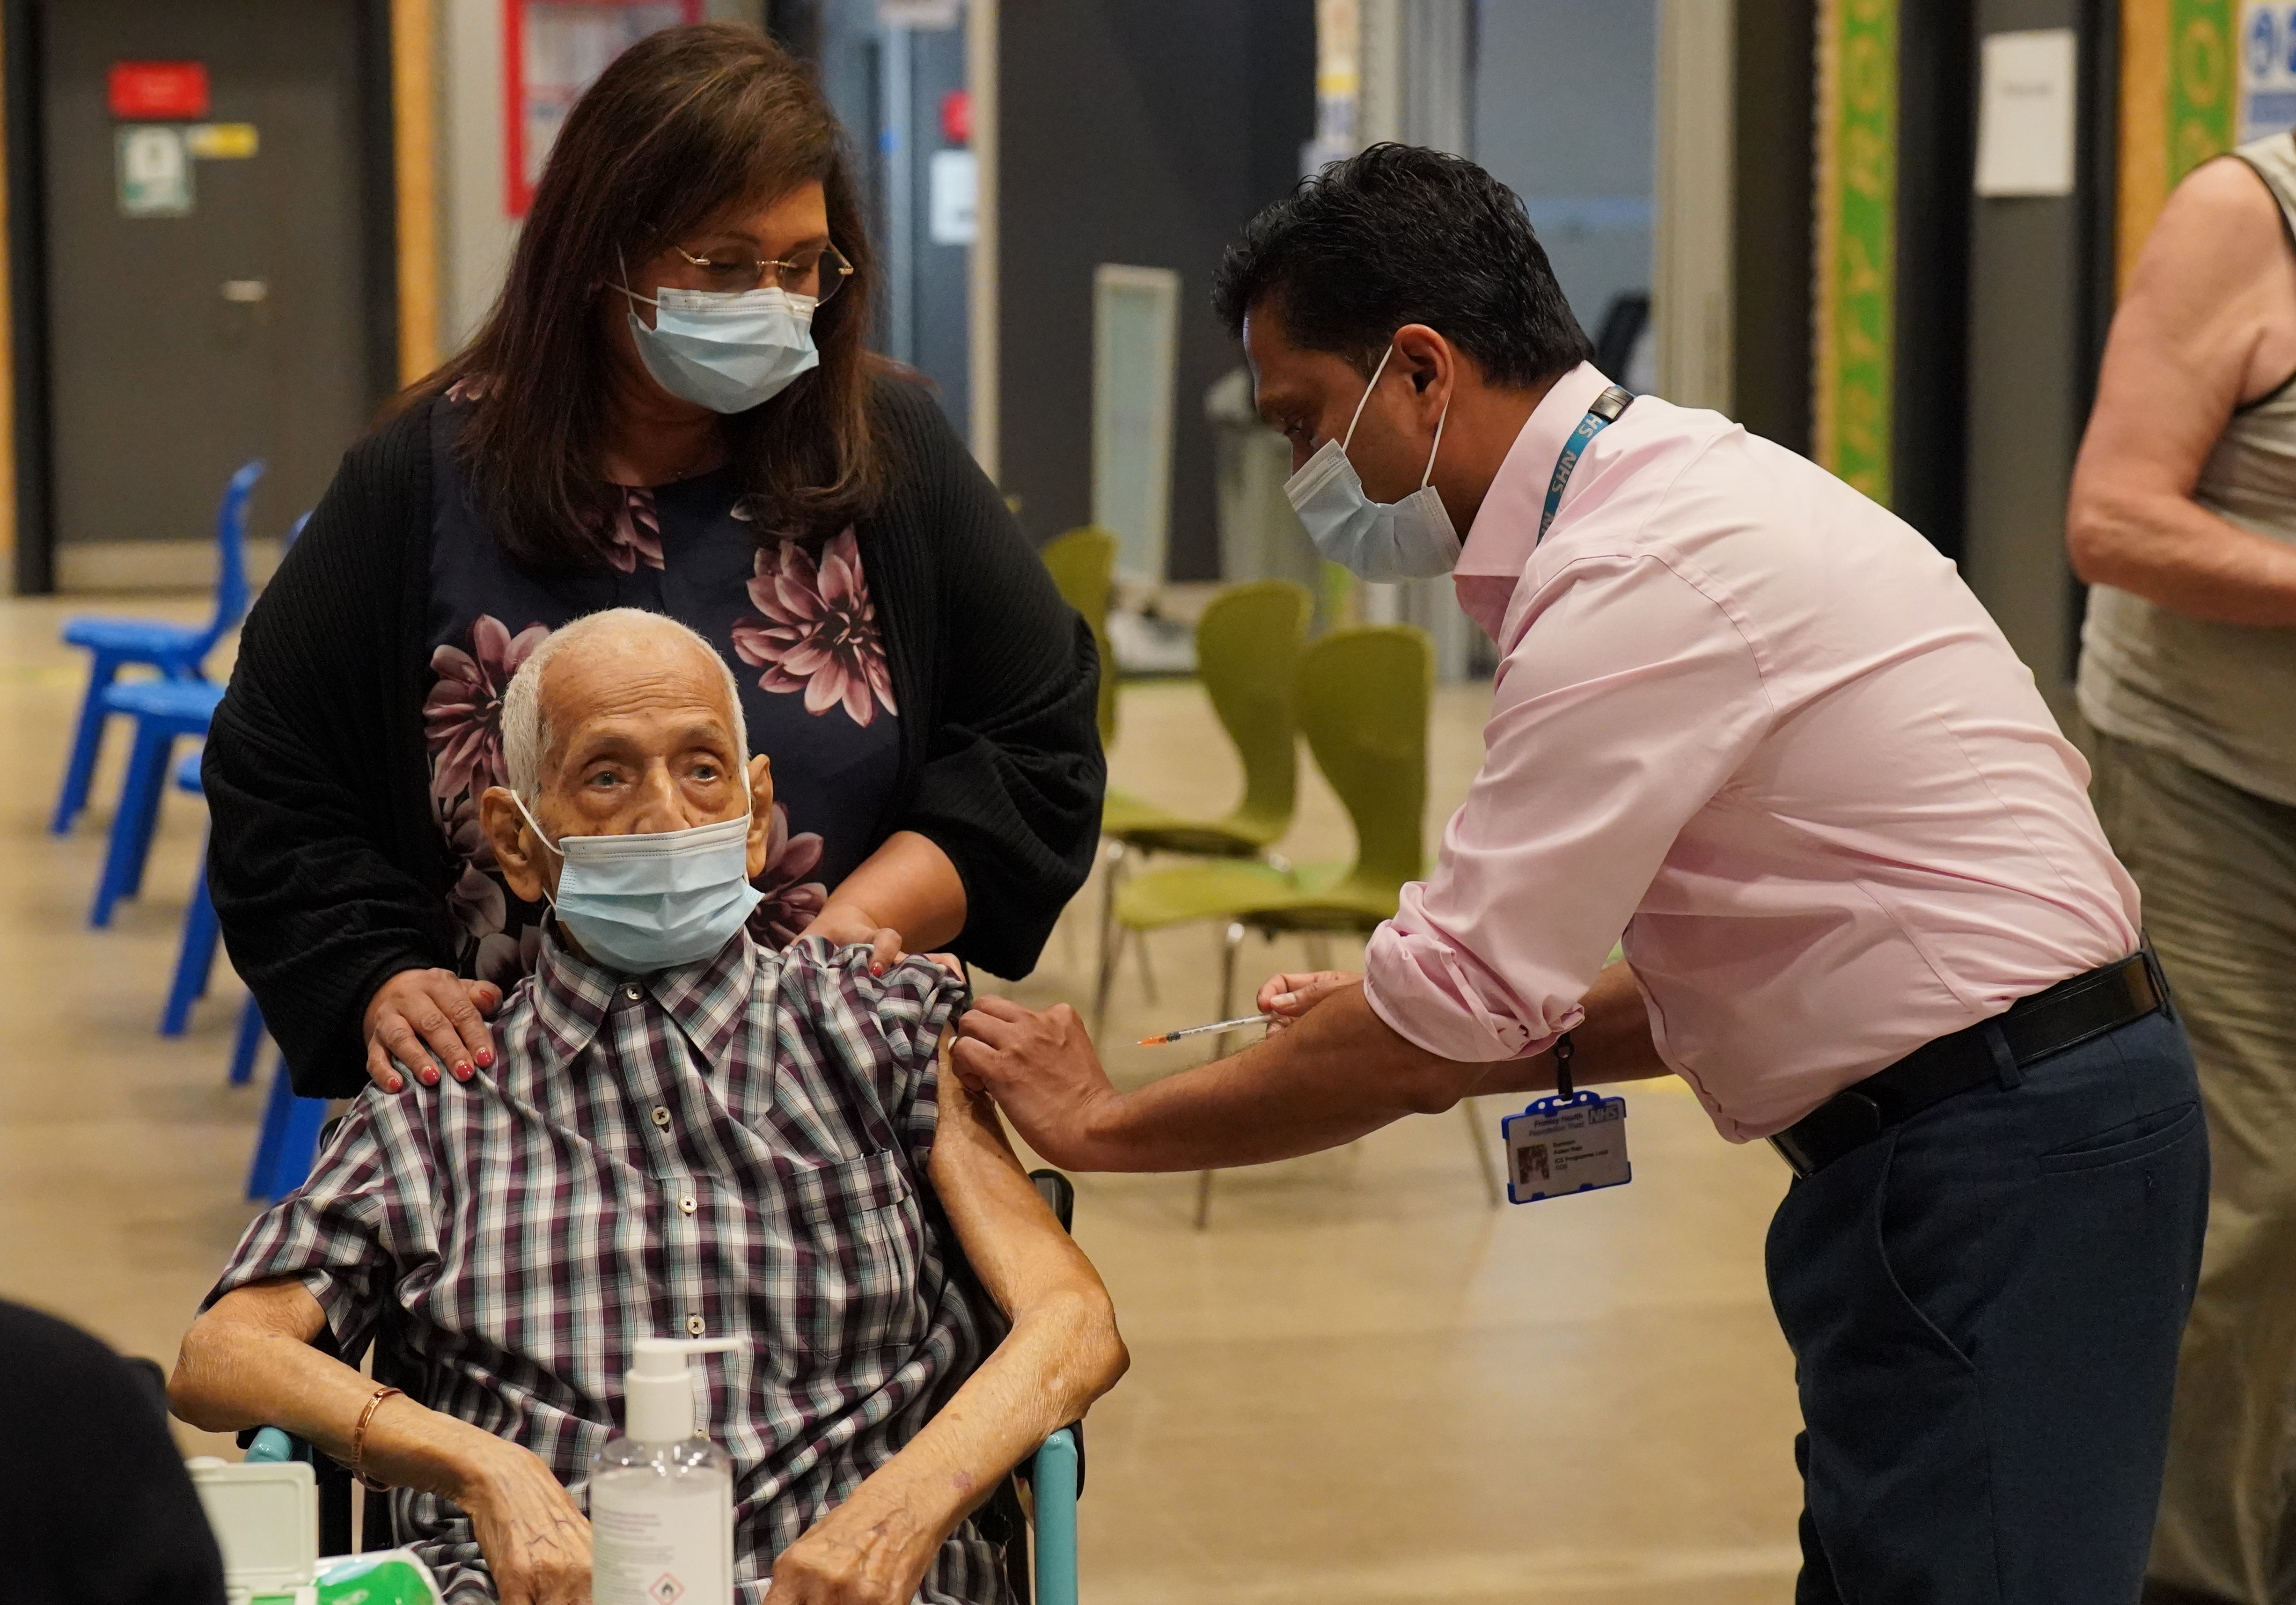 Devraj Jhalam, 95, accompanied by his daughter Dr Lalitha Iyer, receiving his second booster shot of the Covid-19 vaccine from Dr Nithya Nanda at the Salt Hill Activity Centre vaccination clinic in Slough, Berkshire (Jonathan Brady/PA)